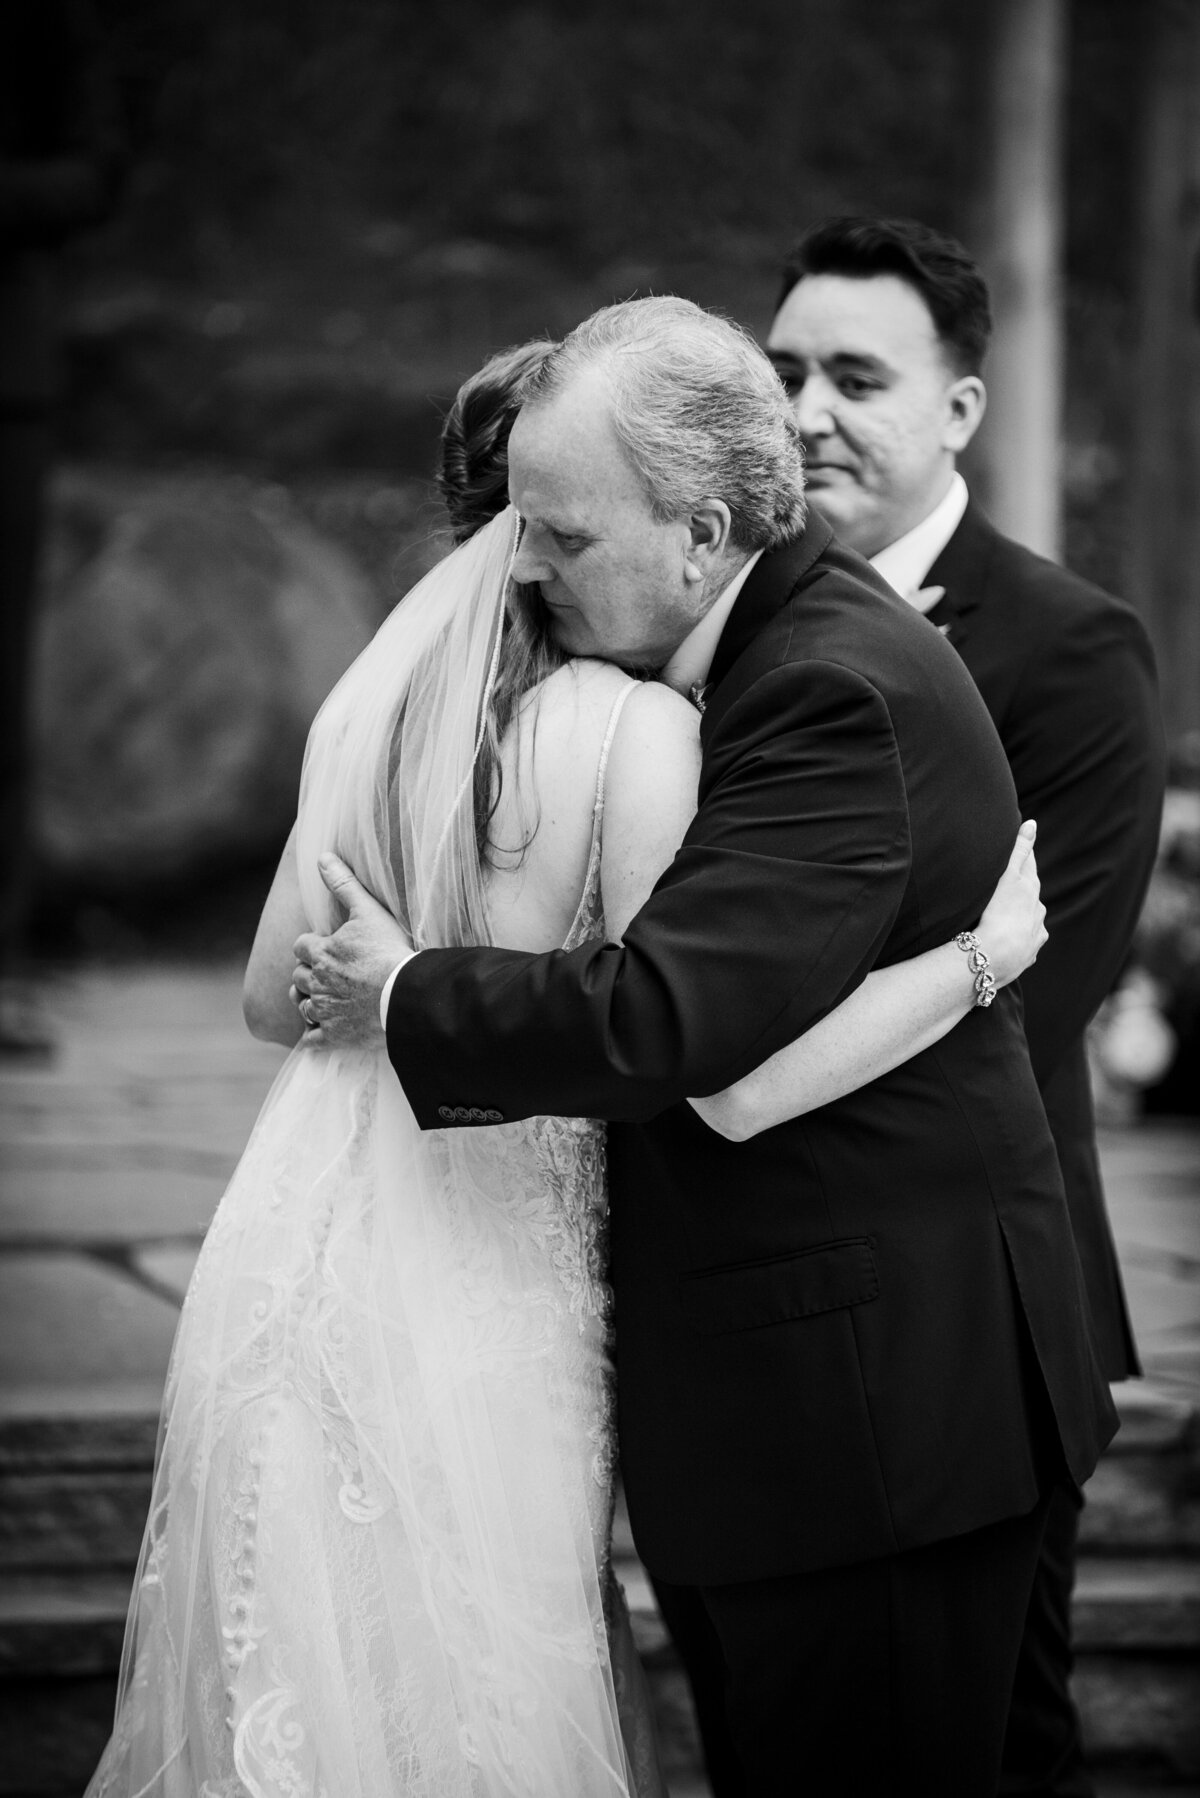 A bride shares a hug with her father as he gives her away during the ceremony.